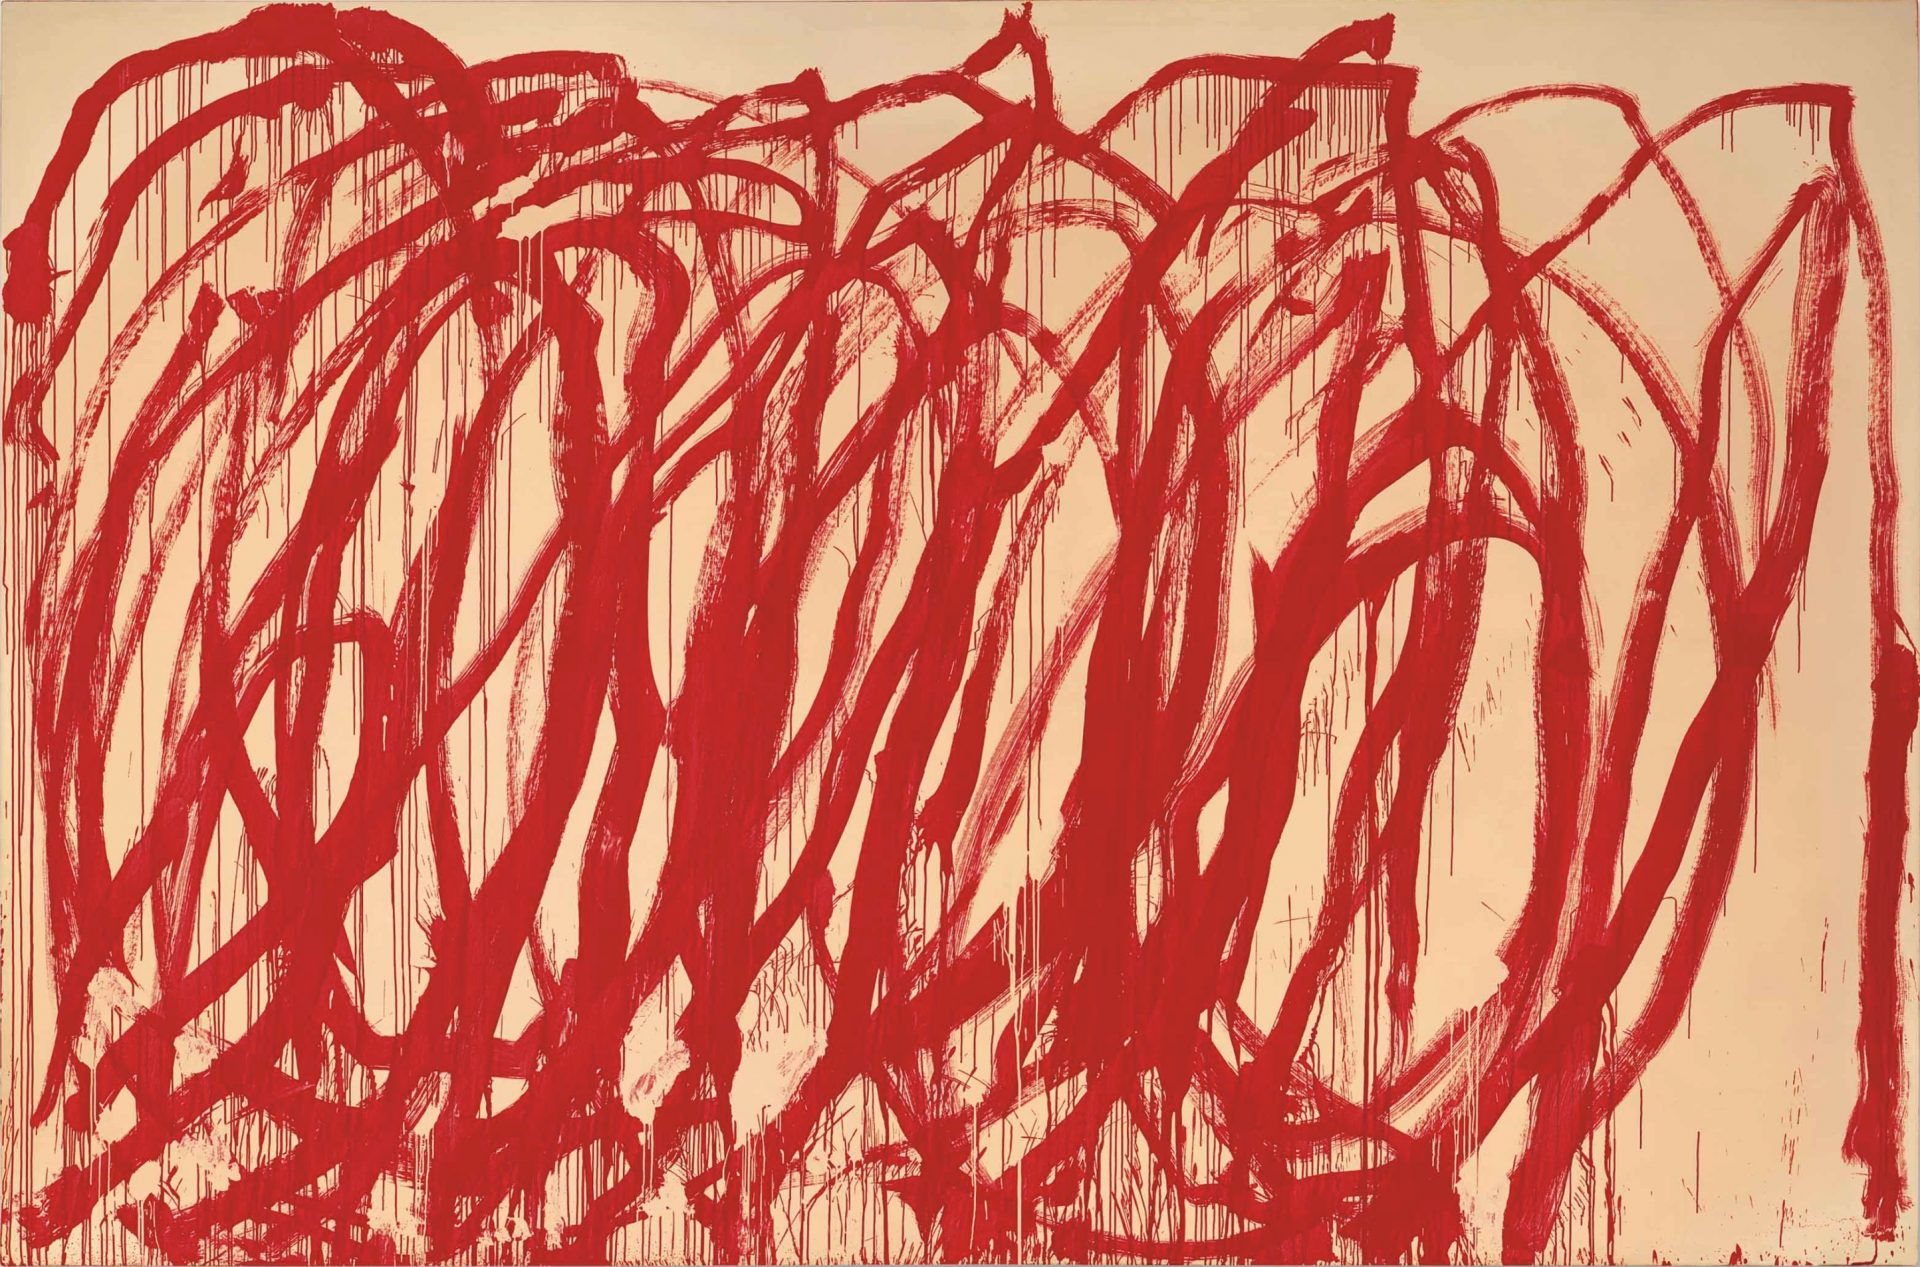 A visually intense large-scale painting by Cy Twombly dubbed 'Untitled, 2005', depicting a swirling, spiraling web of rich vermilion red strokes over a warm beige backdrop, producing an almost primal, passionately volatile energy that mirrors the rise and fall of blood or wine, capturing the spirit of Bacchus, the Greek god of indulgence and intoxication.